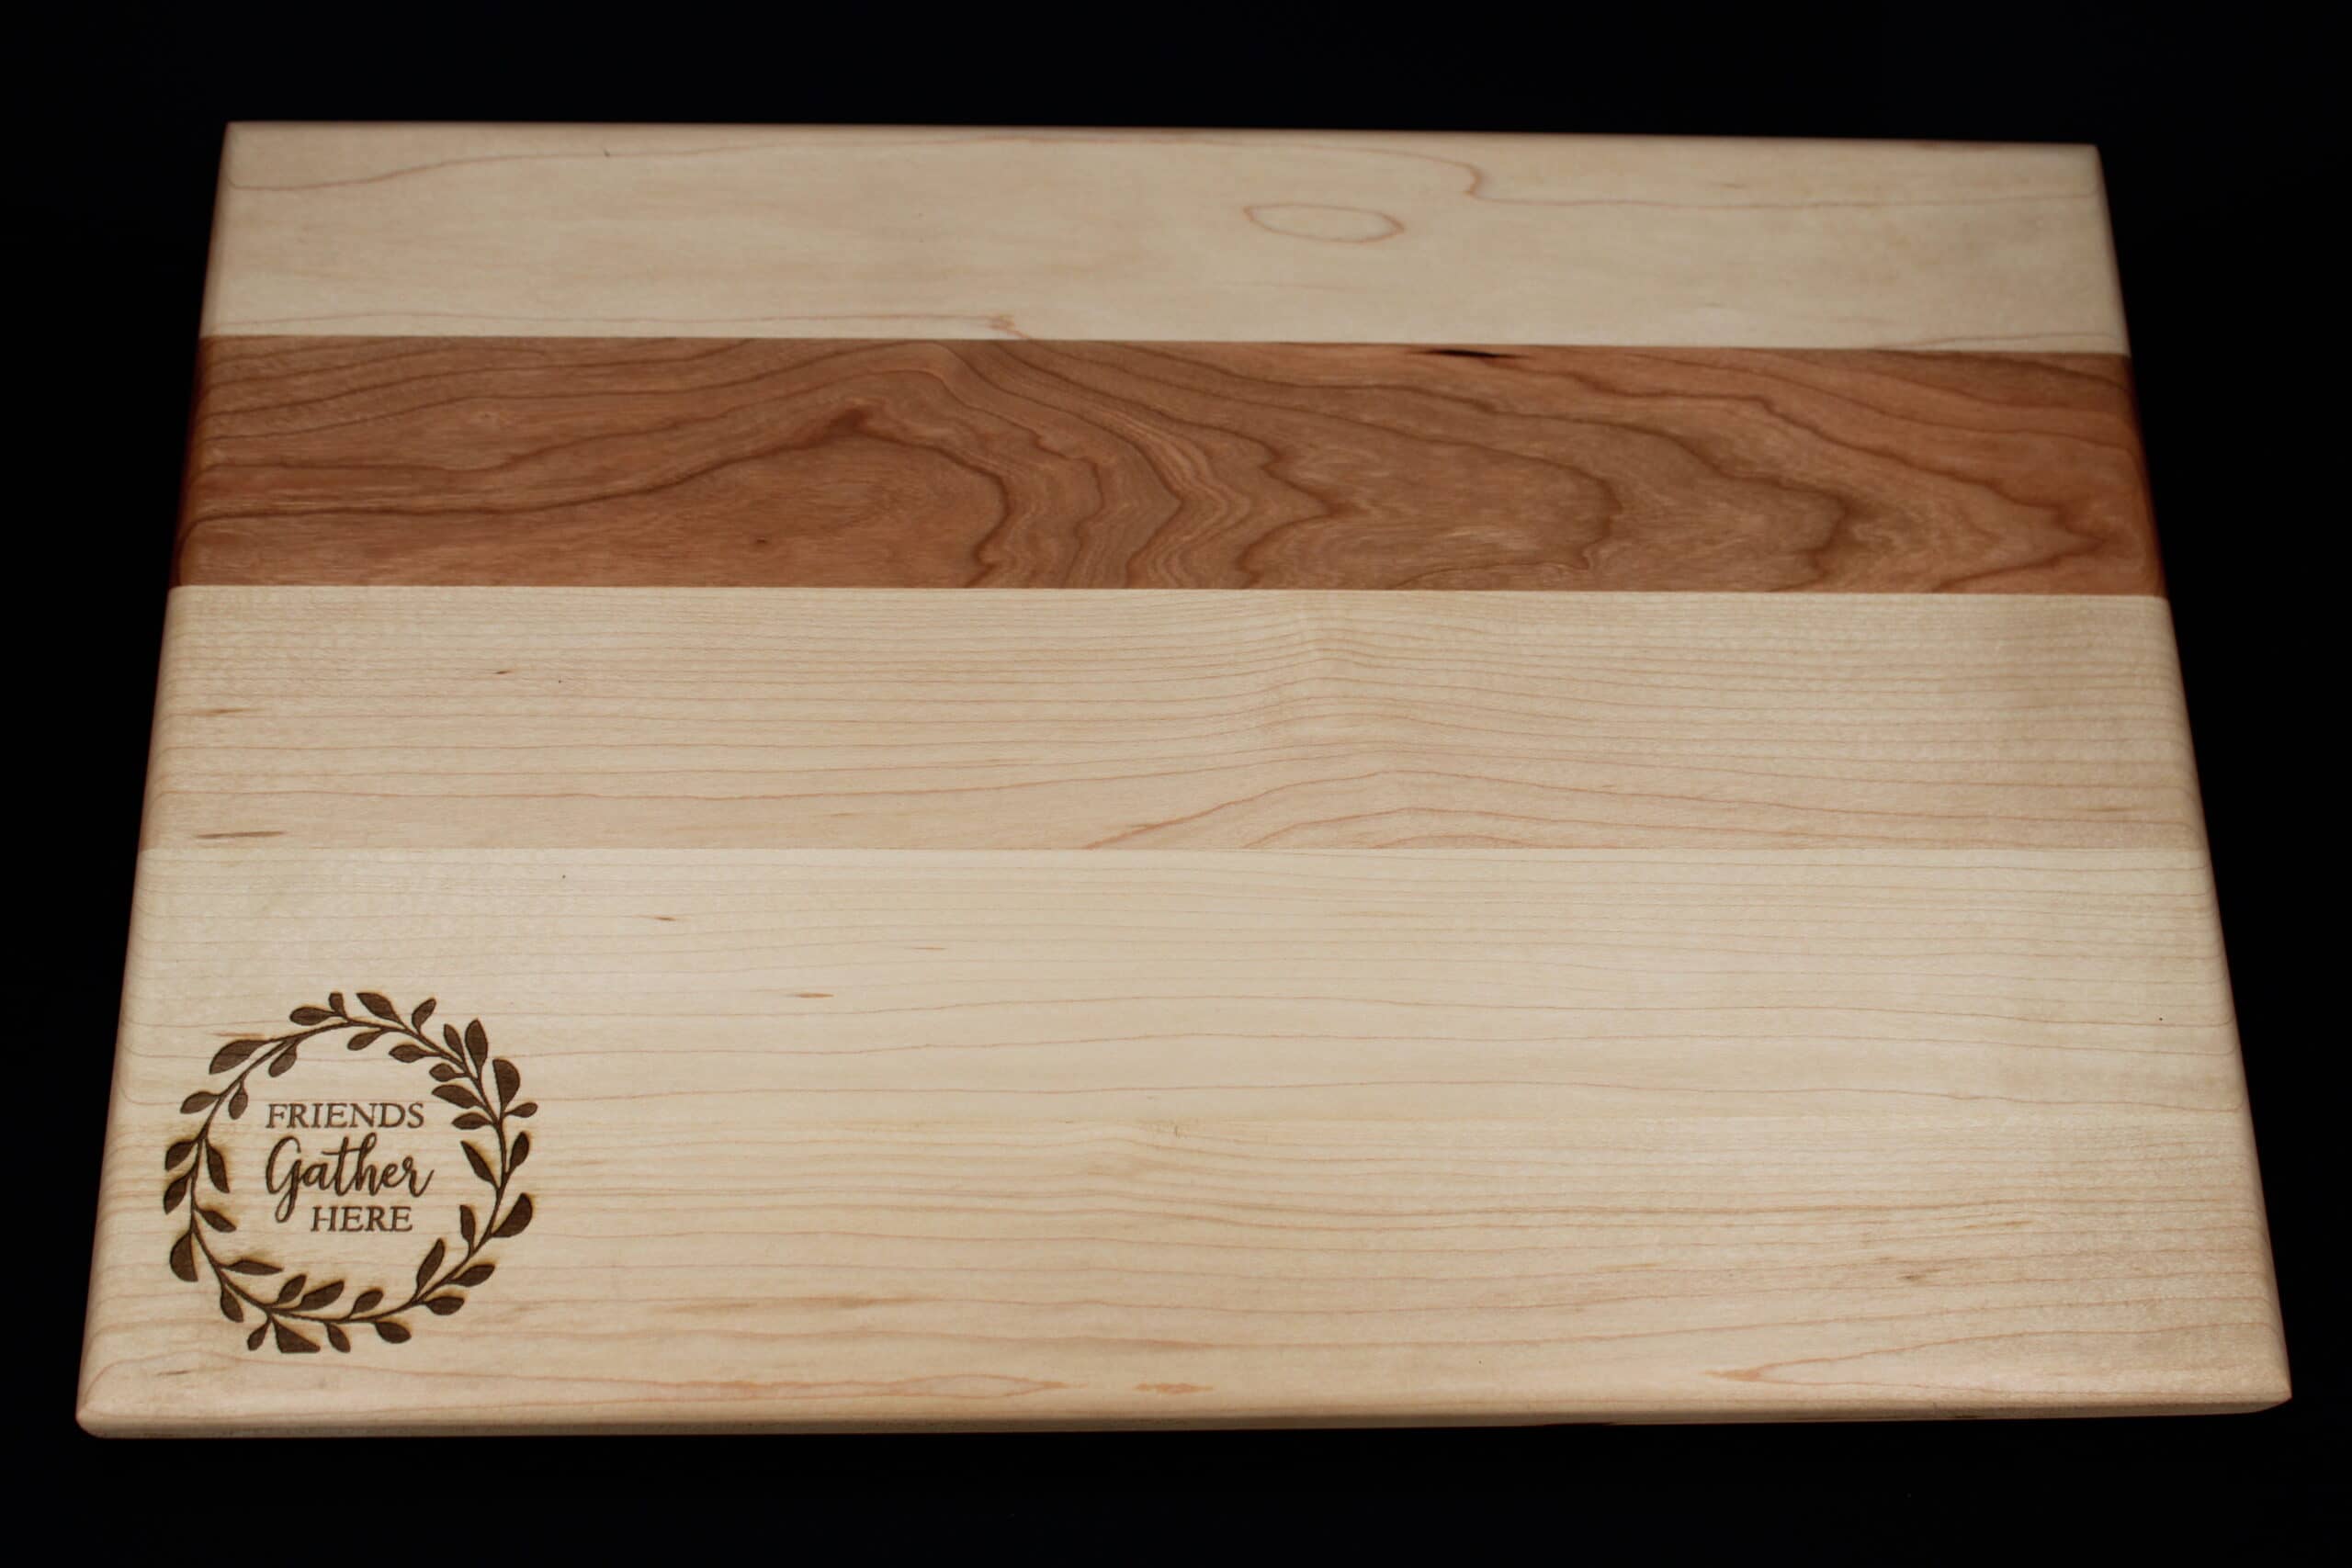 Custom friends gather here wreath engraved on Maple and Cherry cutting board/charcuterie board as a housewarming gift.